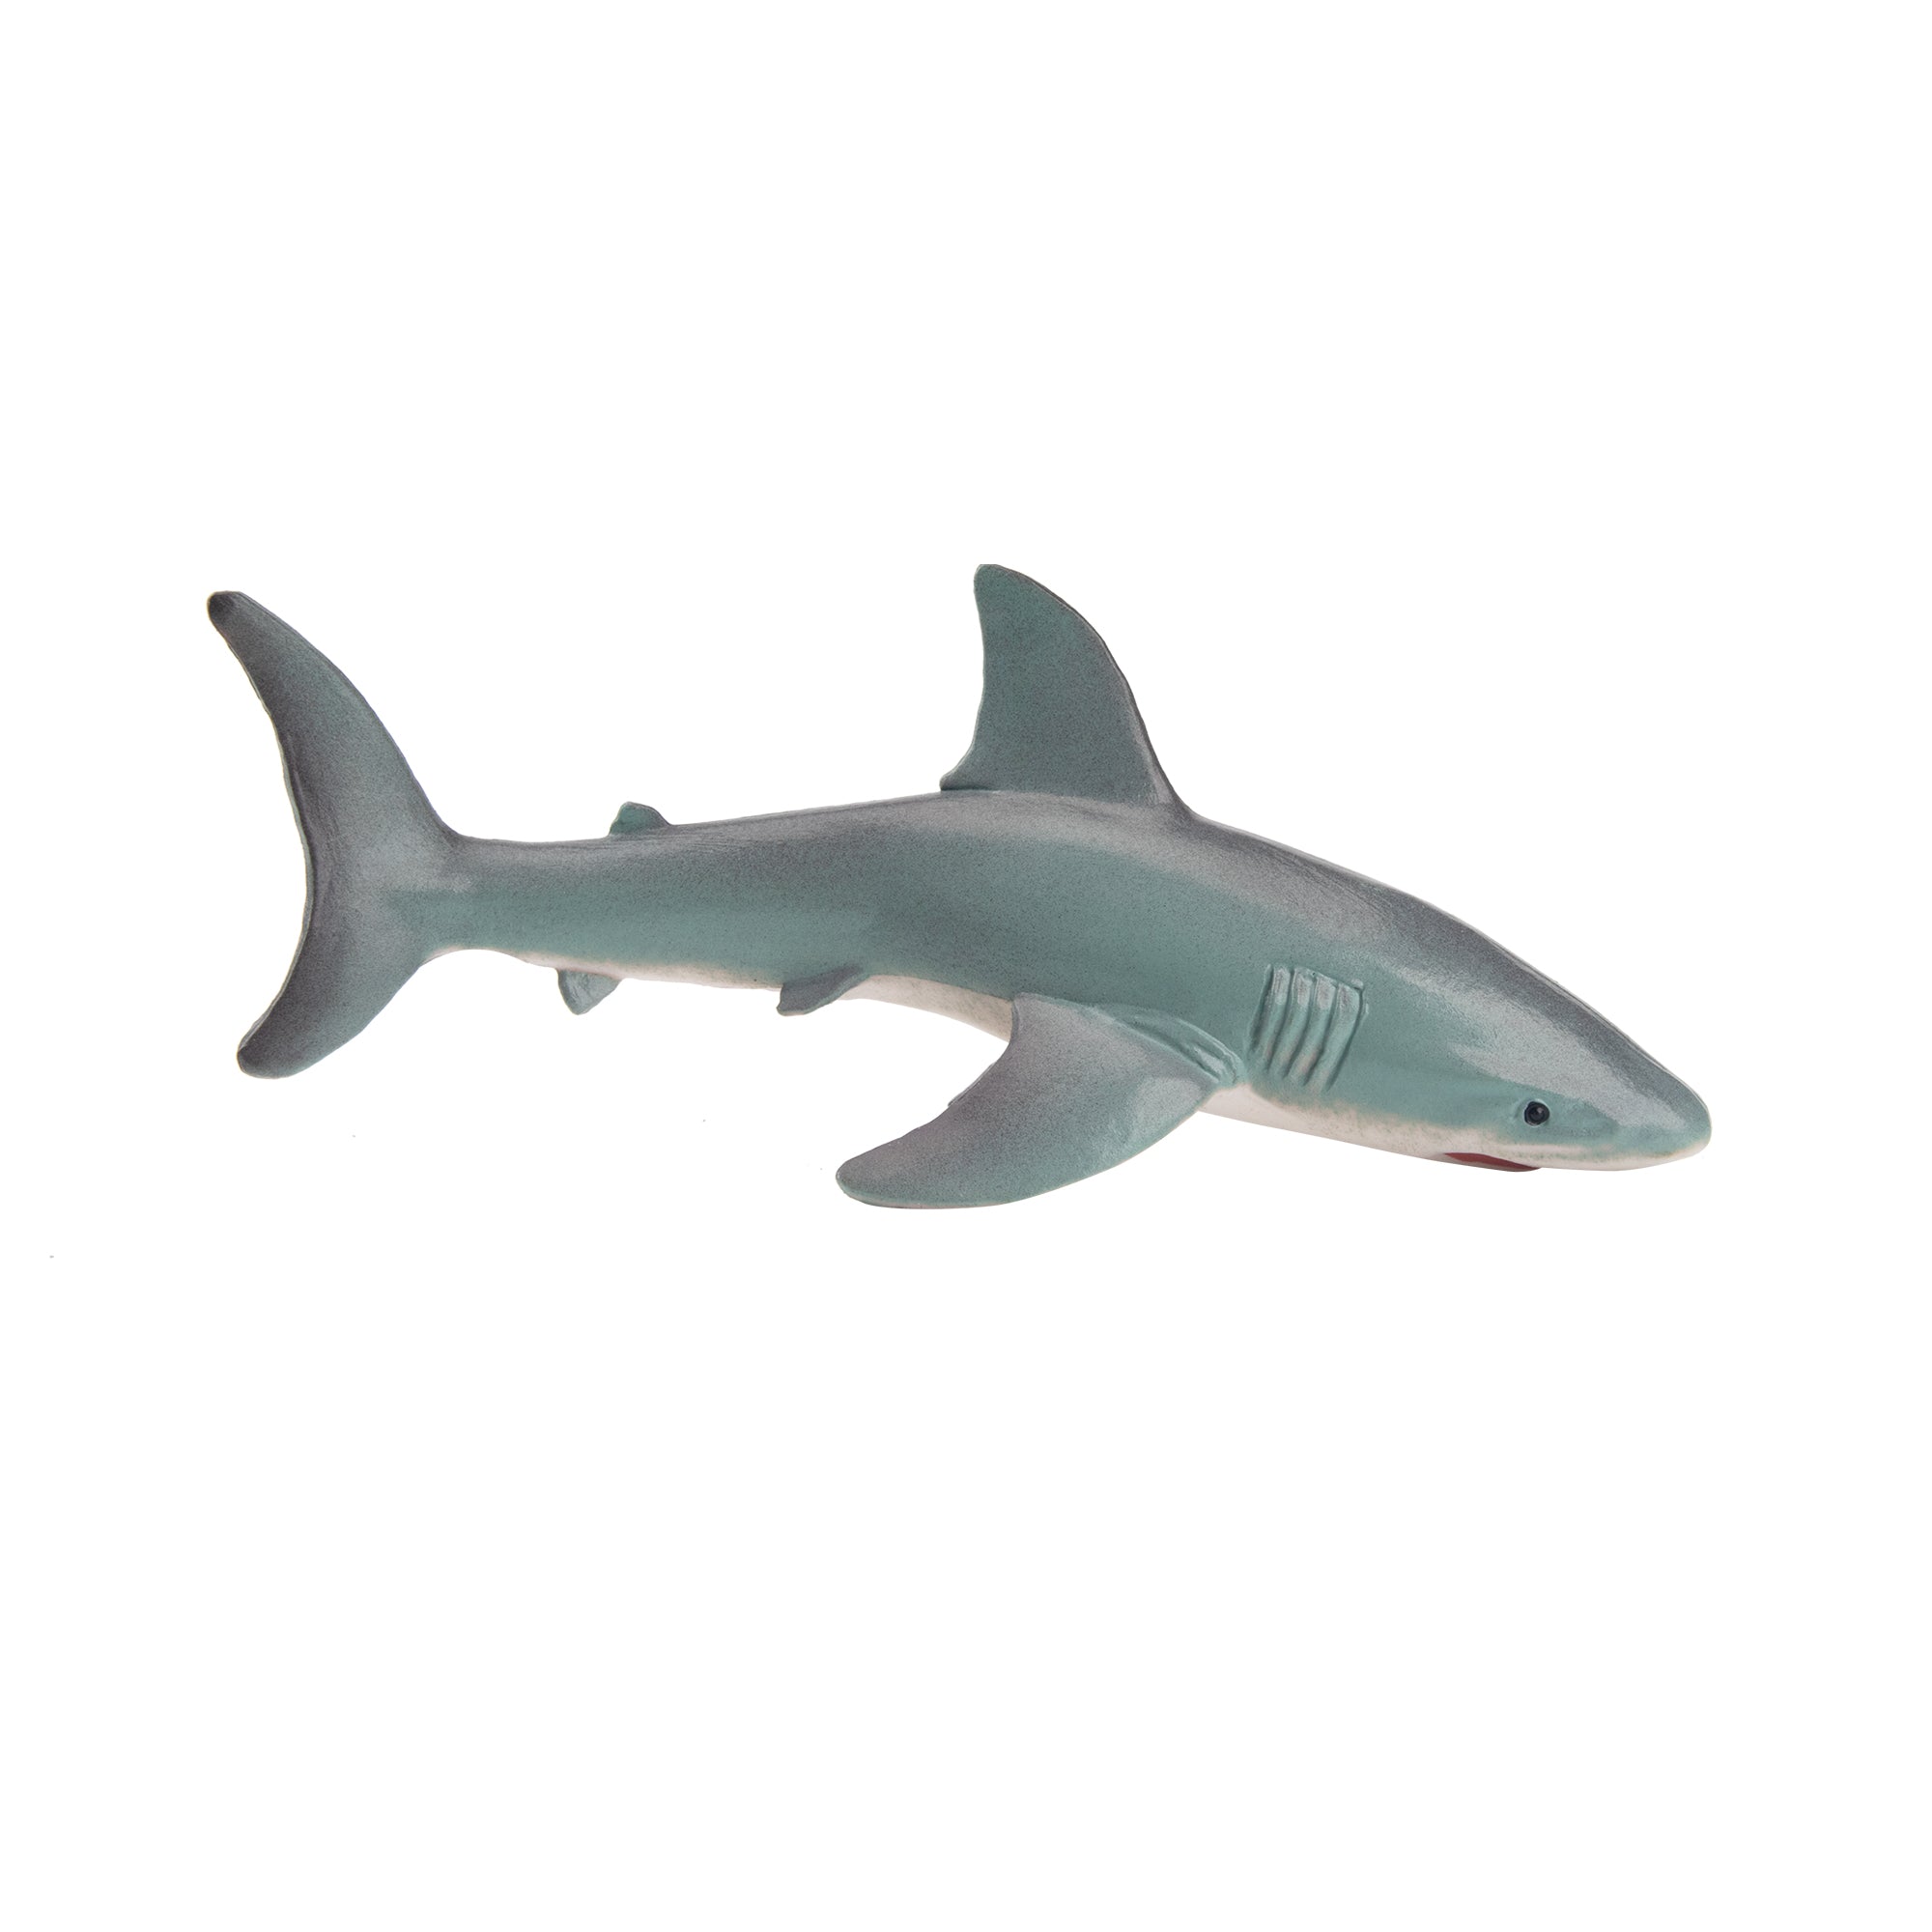 Toymany  Small Size Great White Shark Figurine Toy